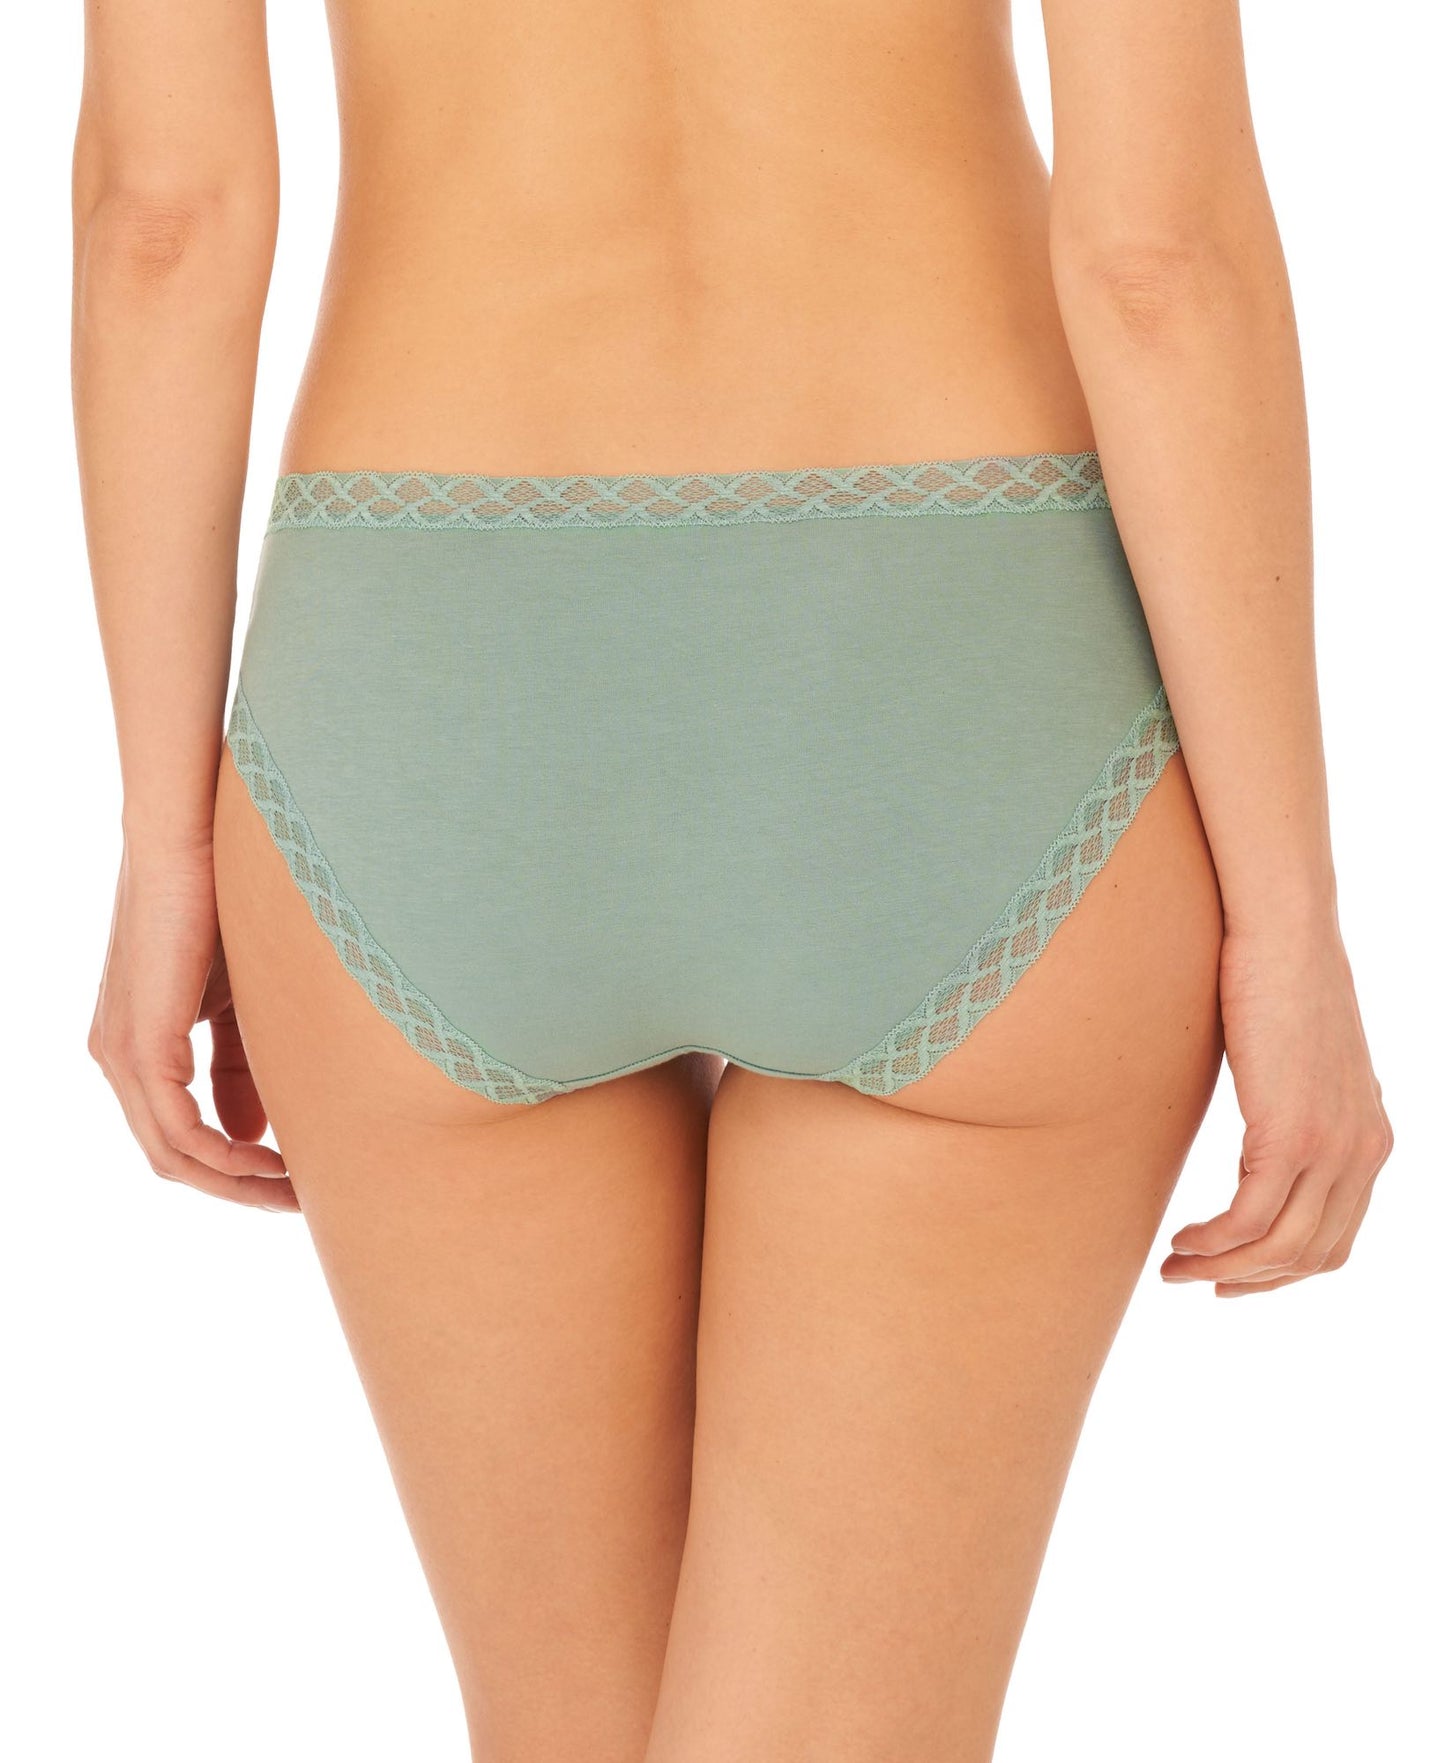 Bliss Girl brief - fall colors